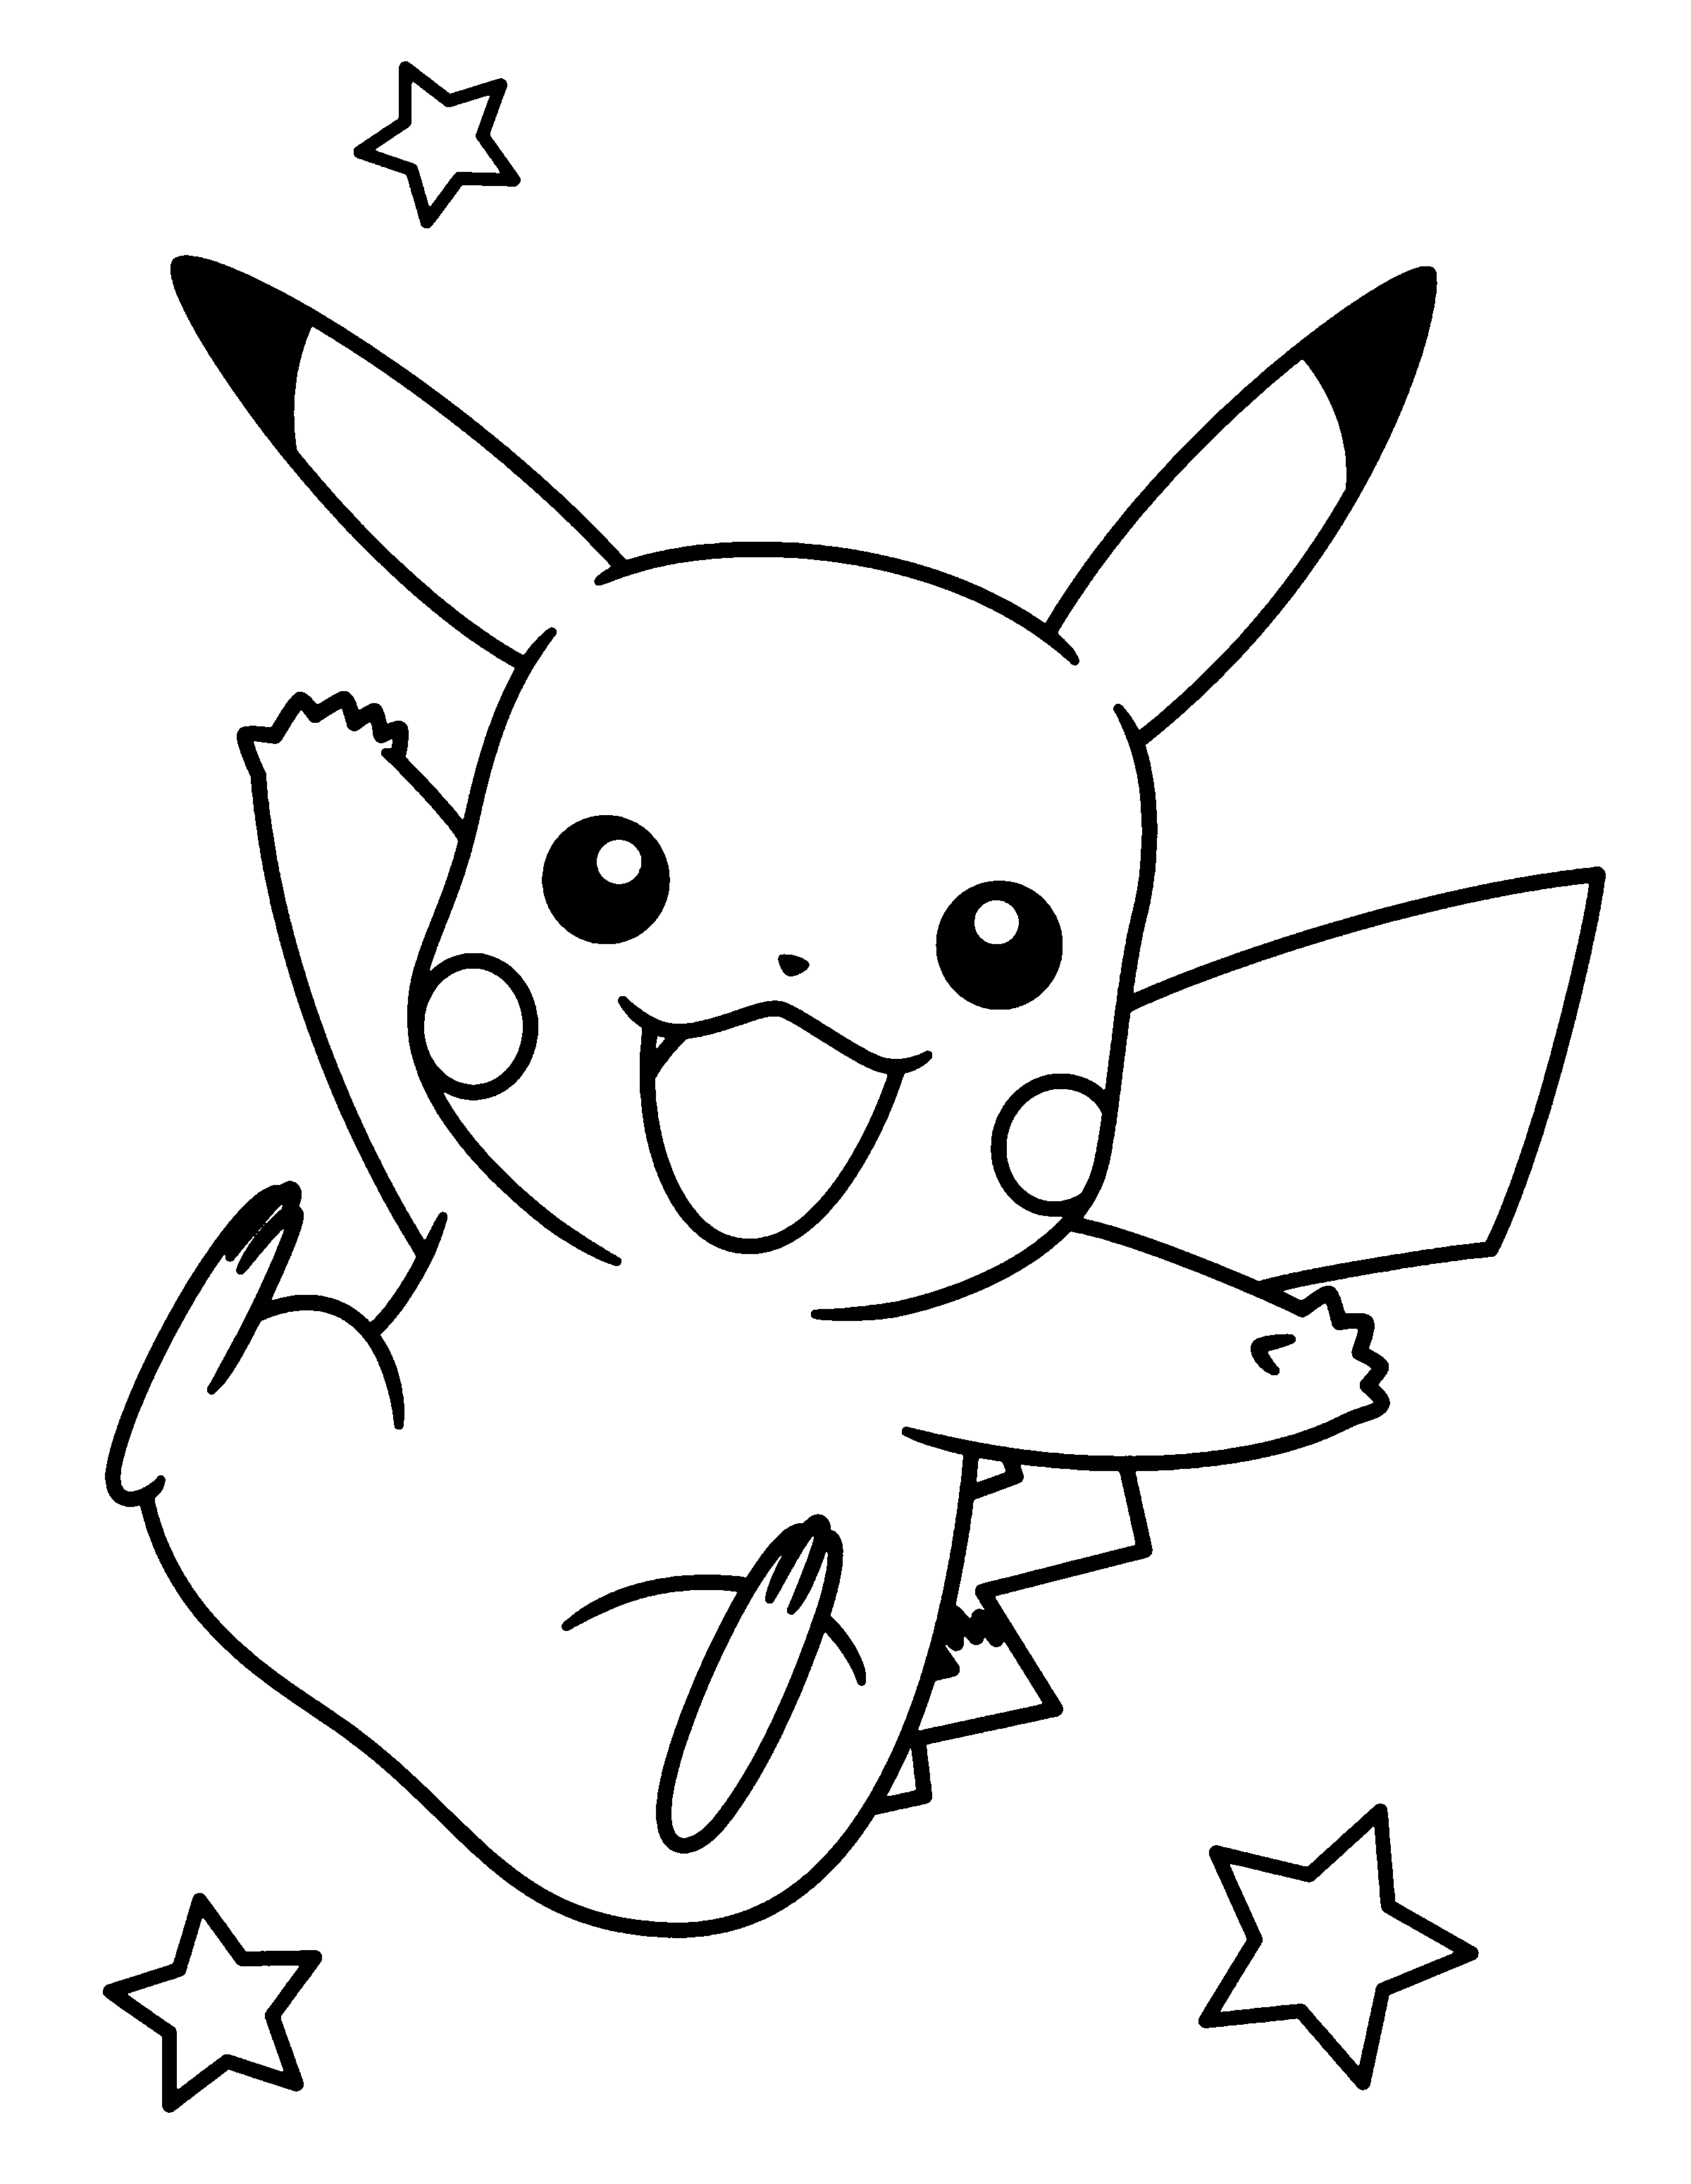 pikachu clipart black and white